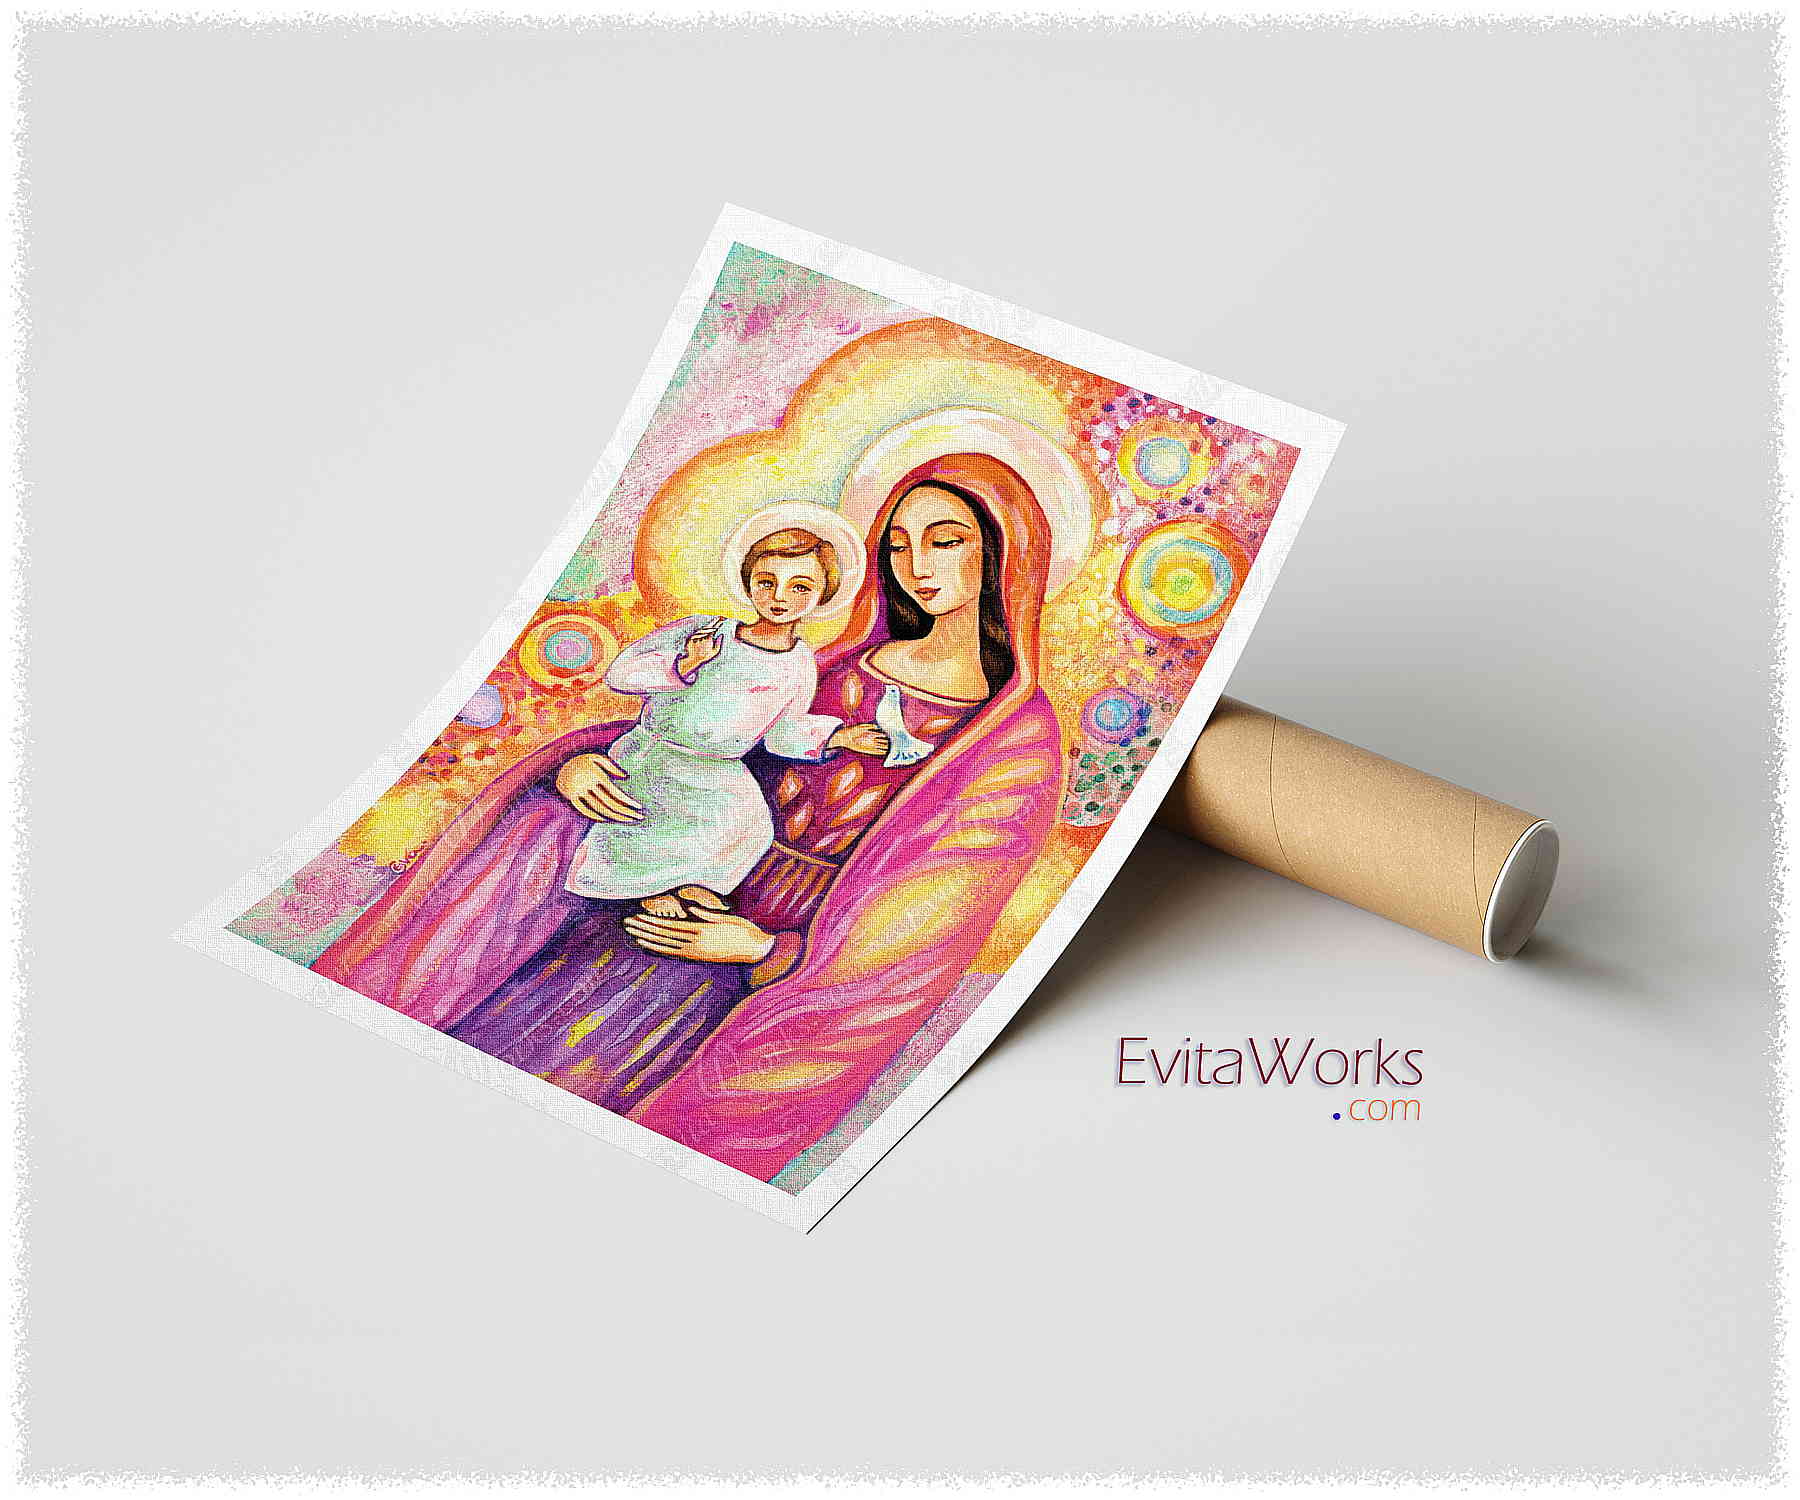 Hit to learn about "Blessing from Light, Madonna and Child" on prints